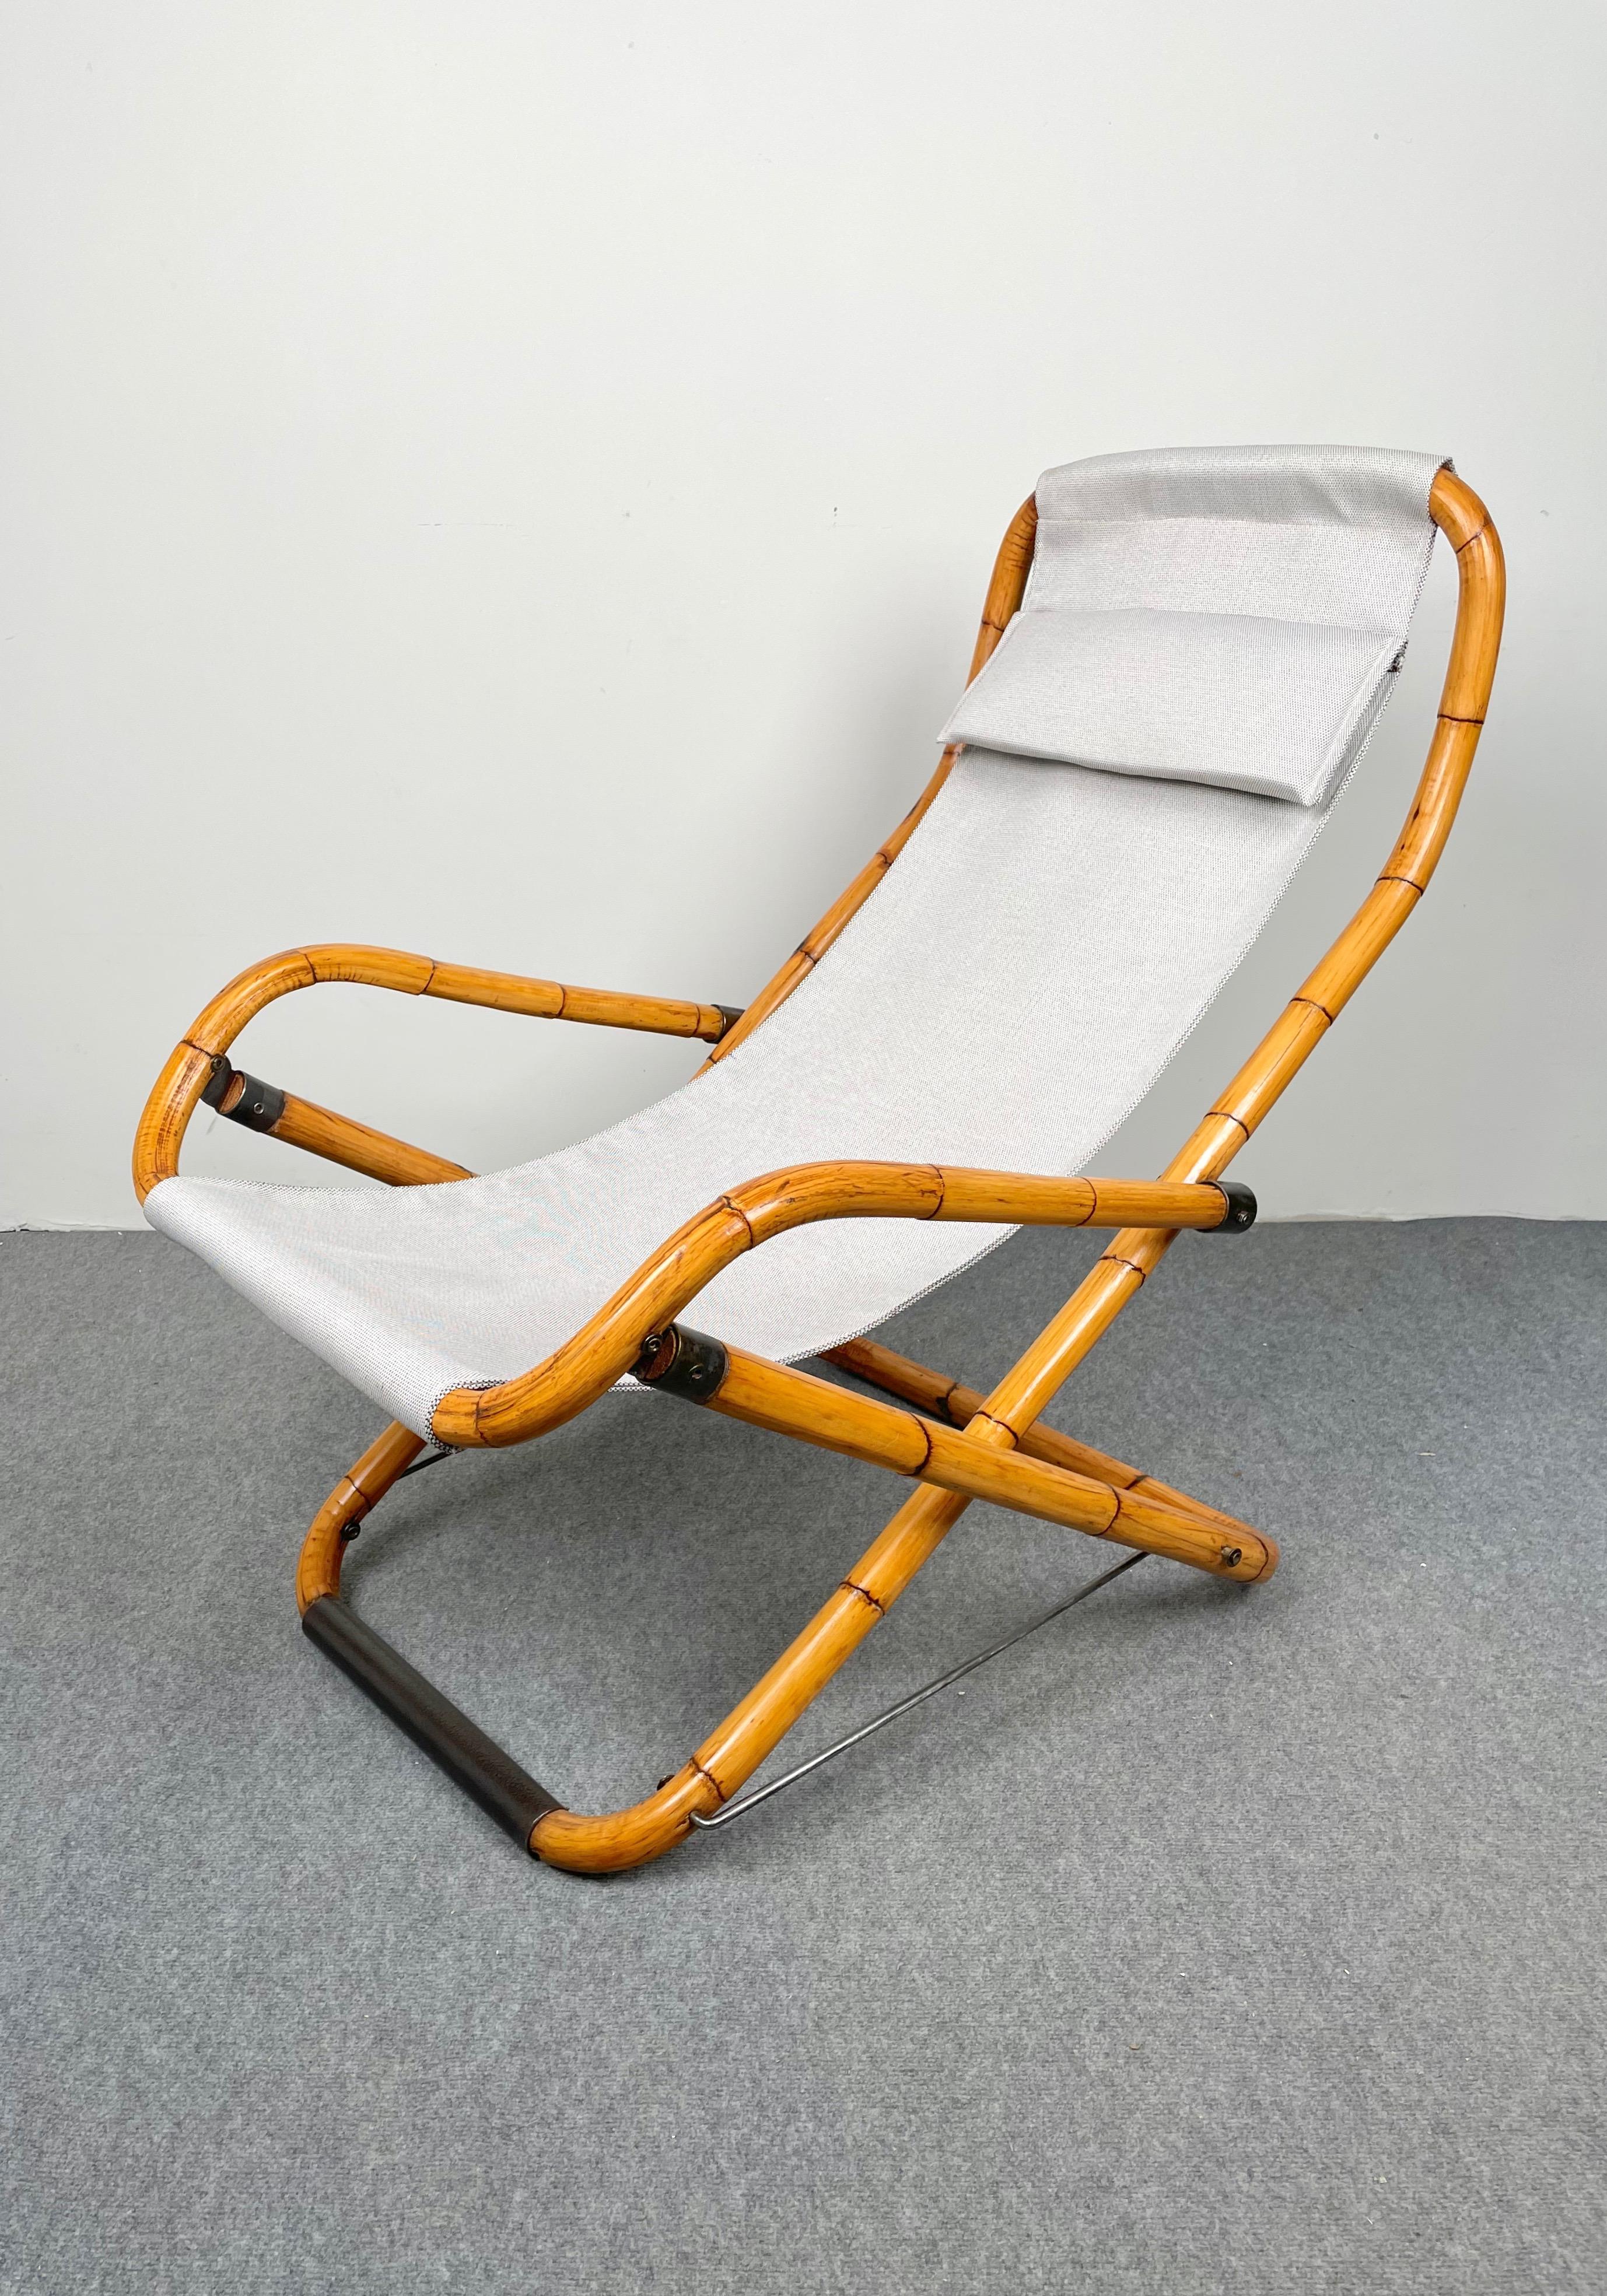 Italian Pair of Bamboo, Iron and Fabric Folding Lounge Deck Chair, Italy, 1960s For Sale